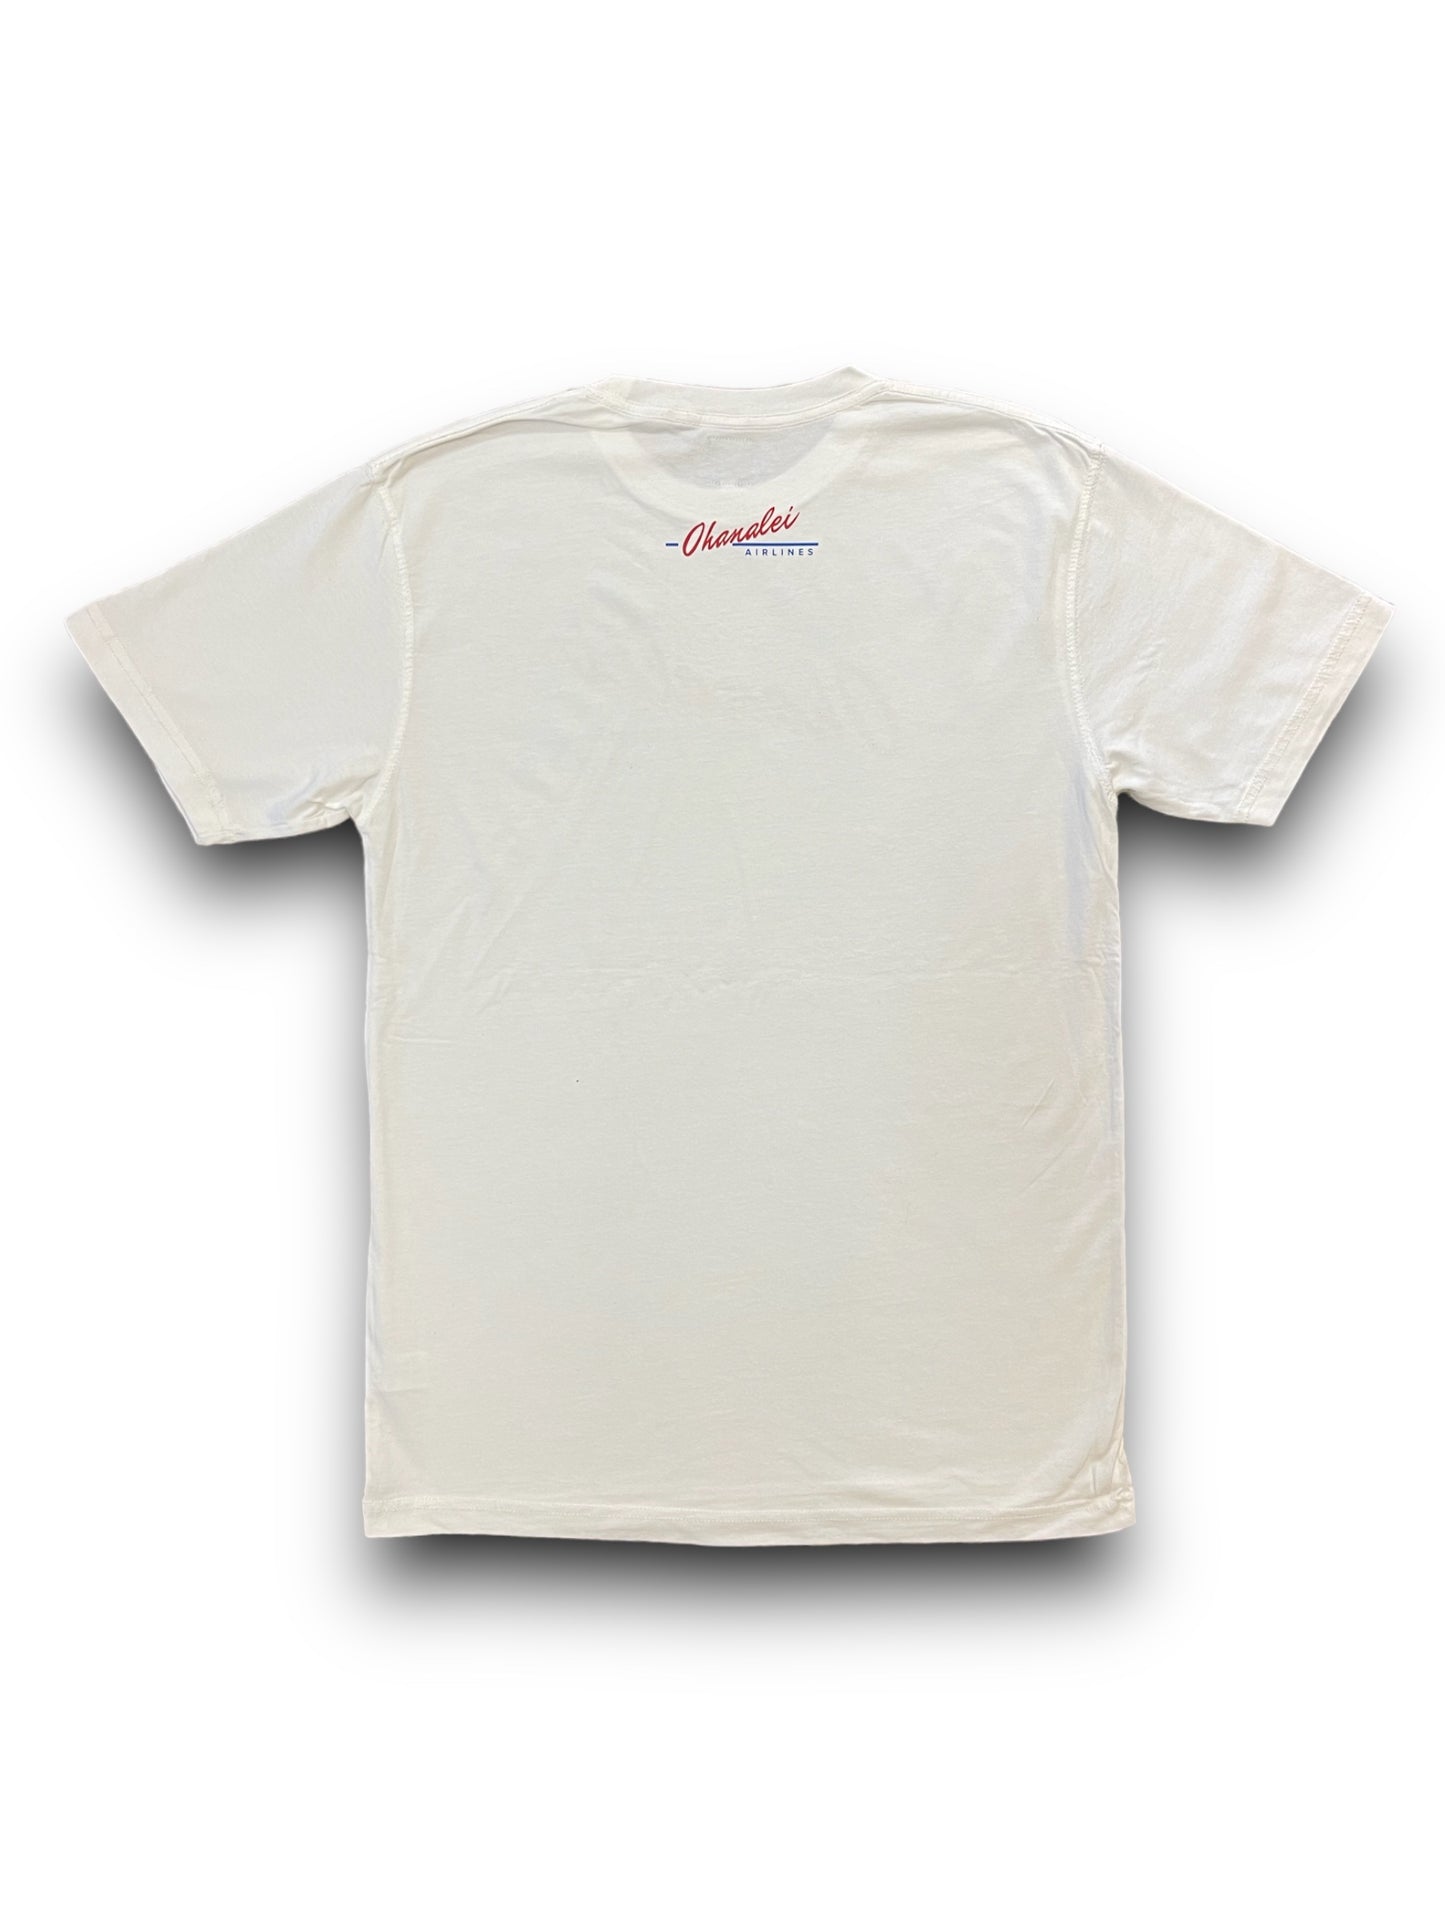 Ohanalei Airlines - White Tee